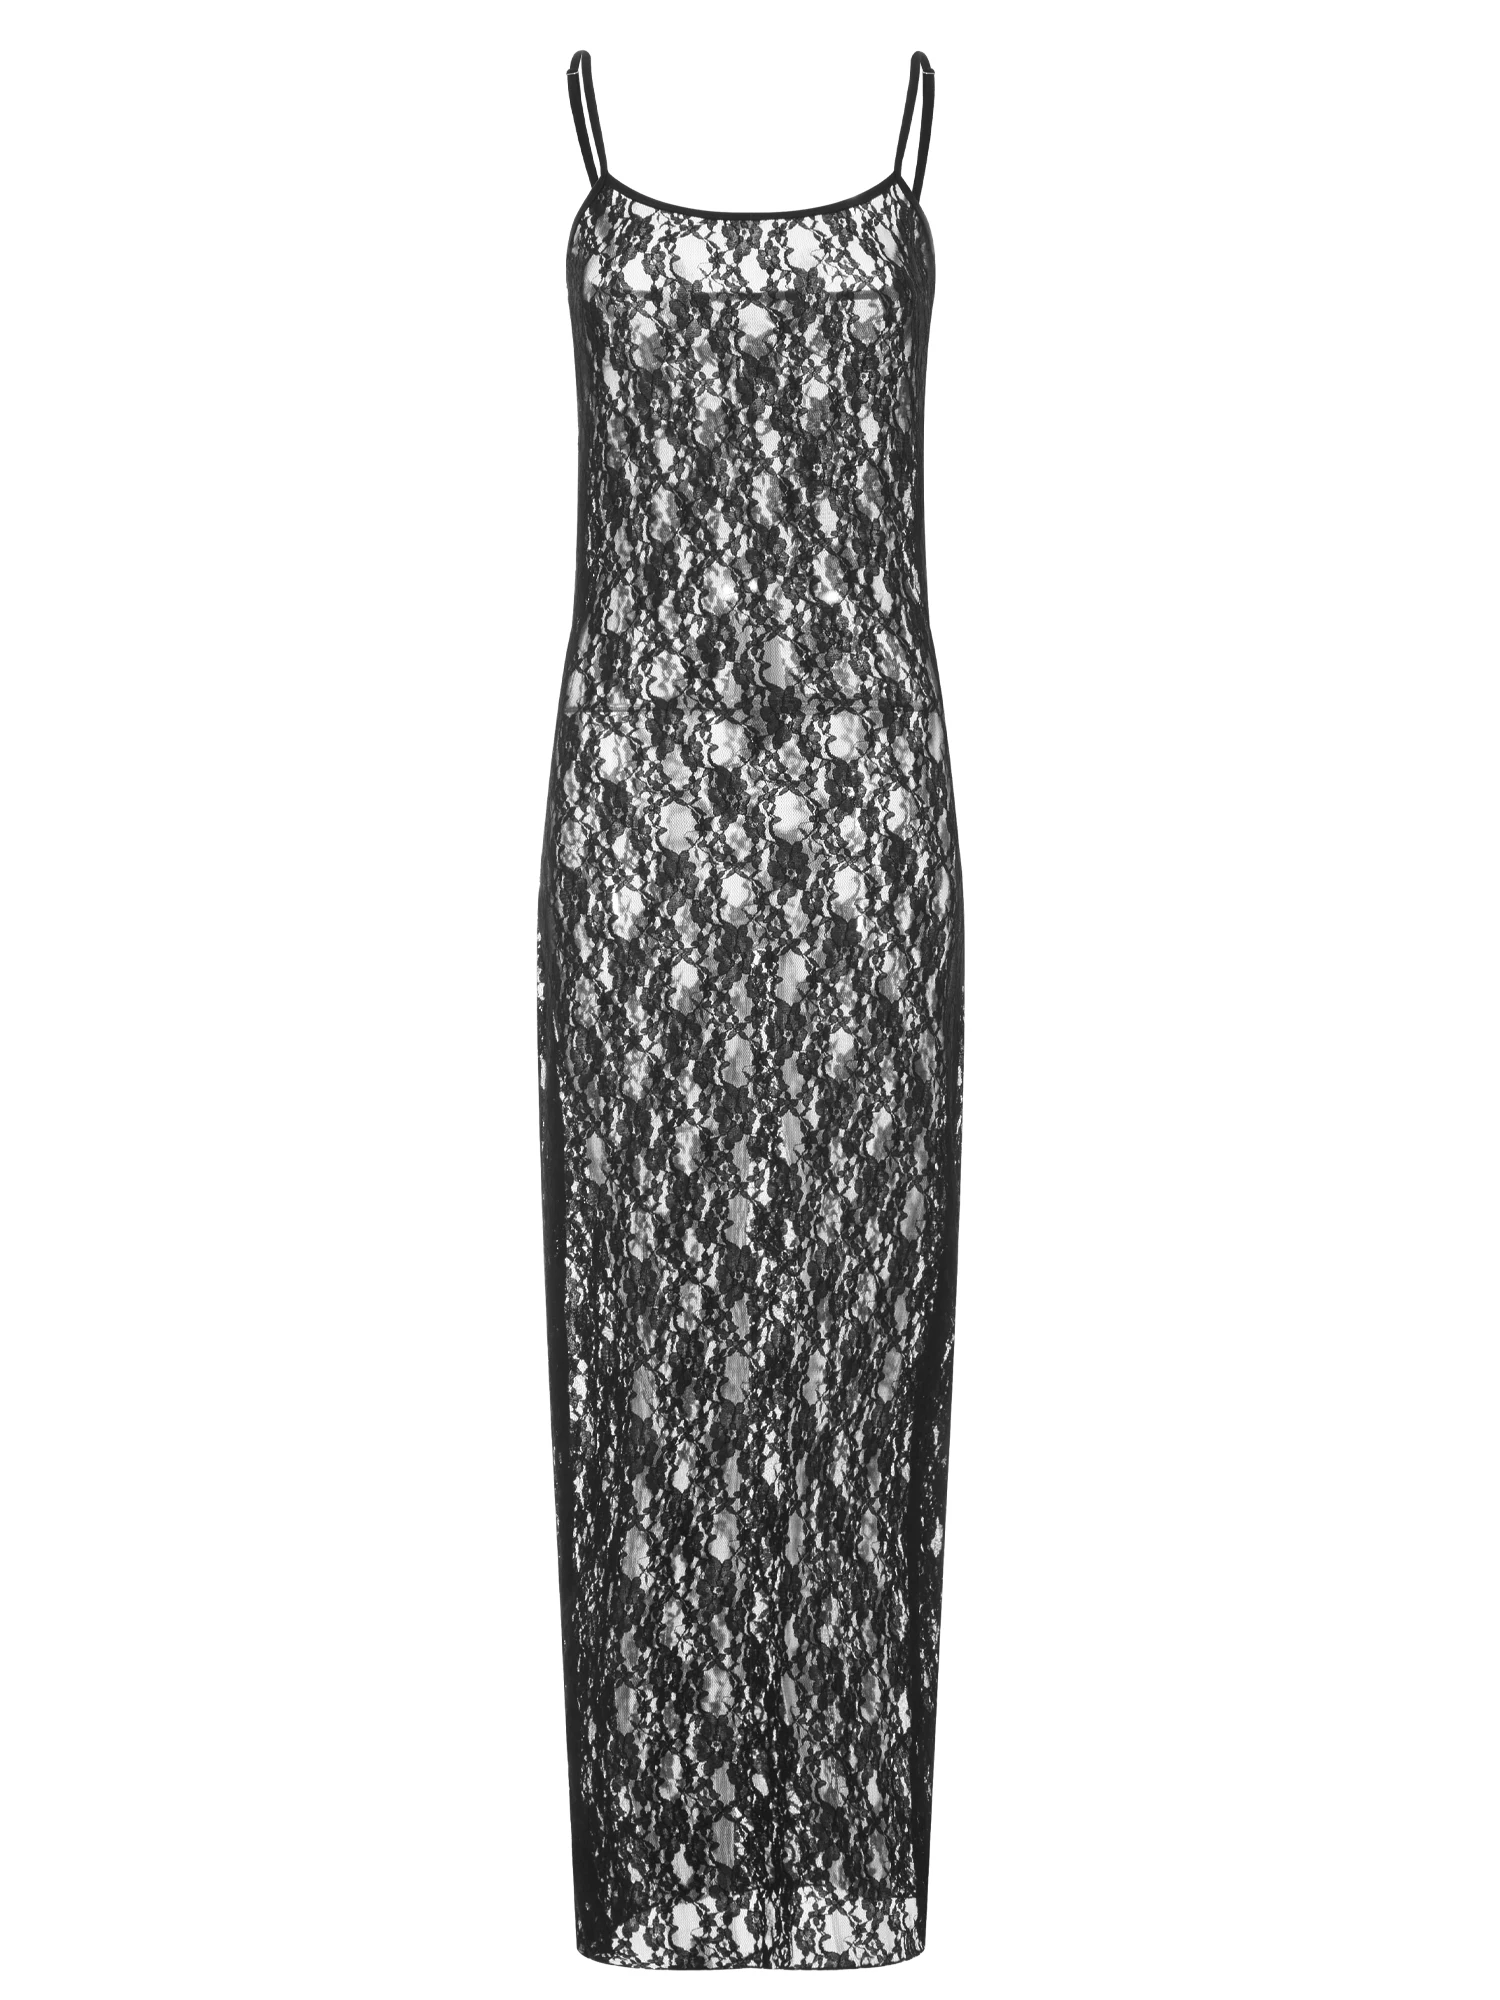 

Women s Elegant Floral Lace Maxi Dress with Sheer High Split Sleeveless V-Neckline and Ruffled Details